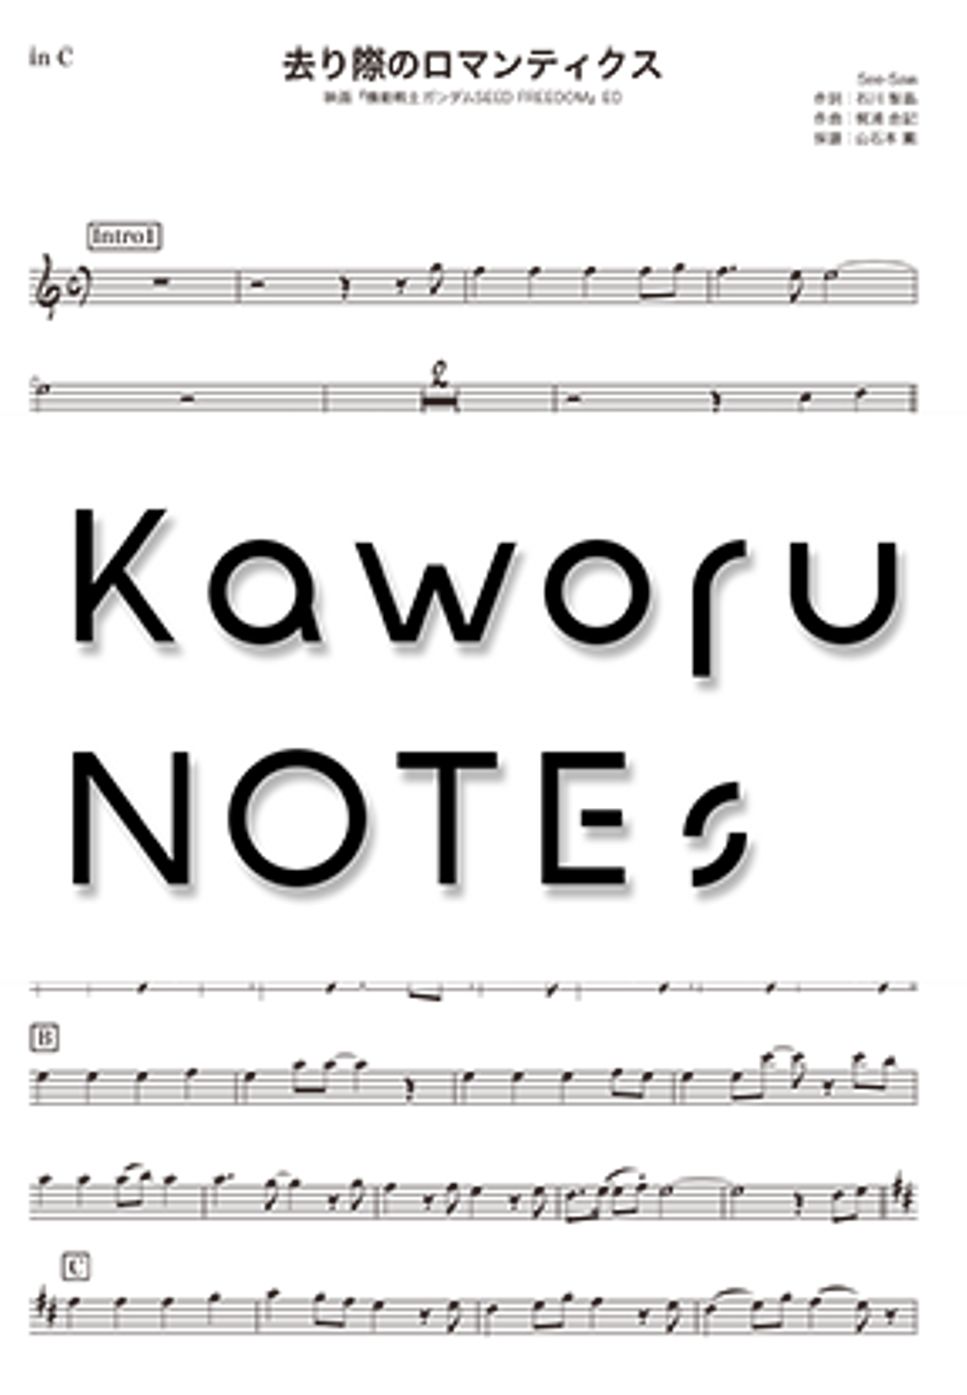 See-Saw - Sarigiwa no Romantics（in C  / "Mobile Suit Gundam SEED FREEDOM"） by Kaworu NOTEs